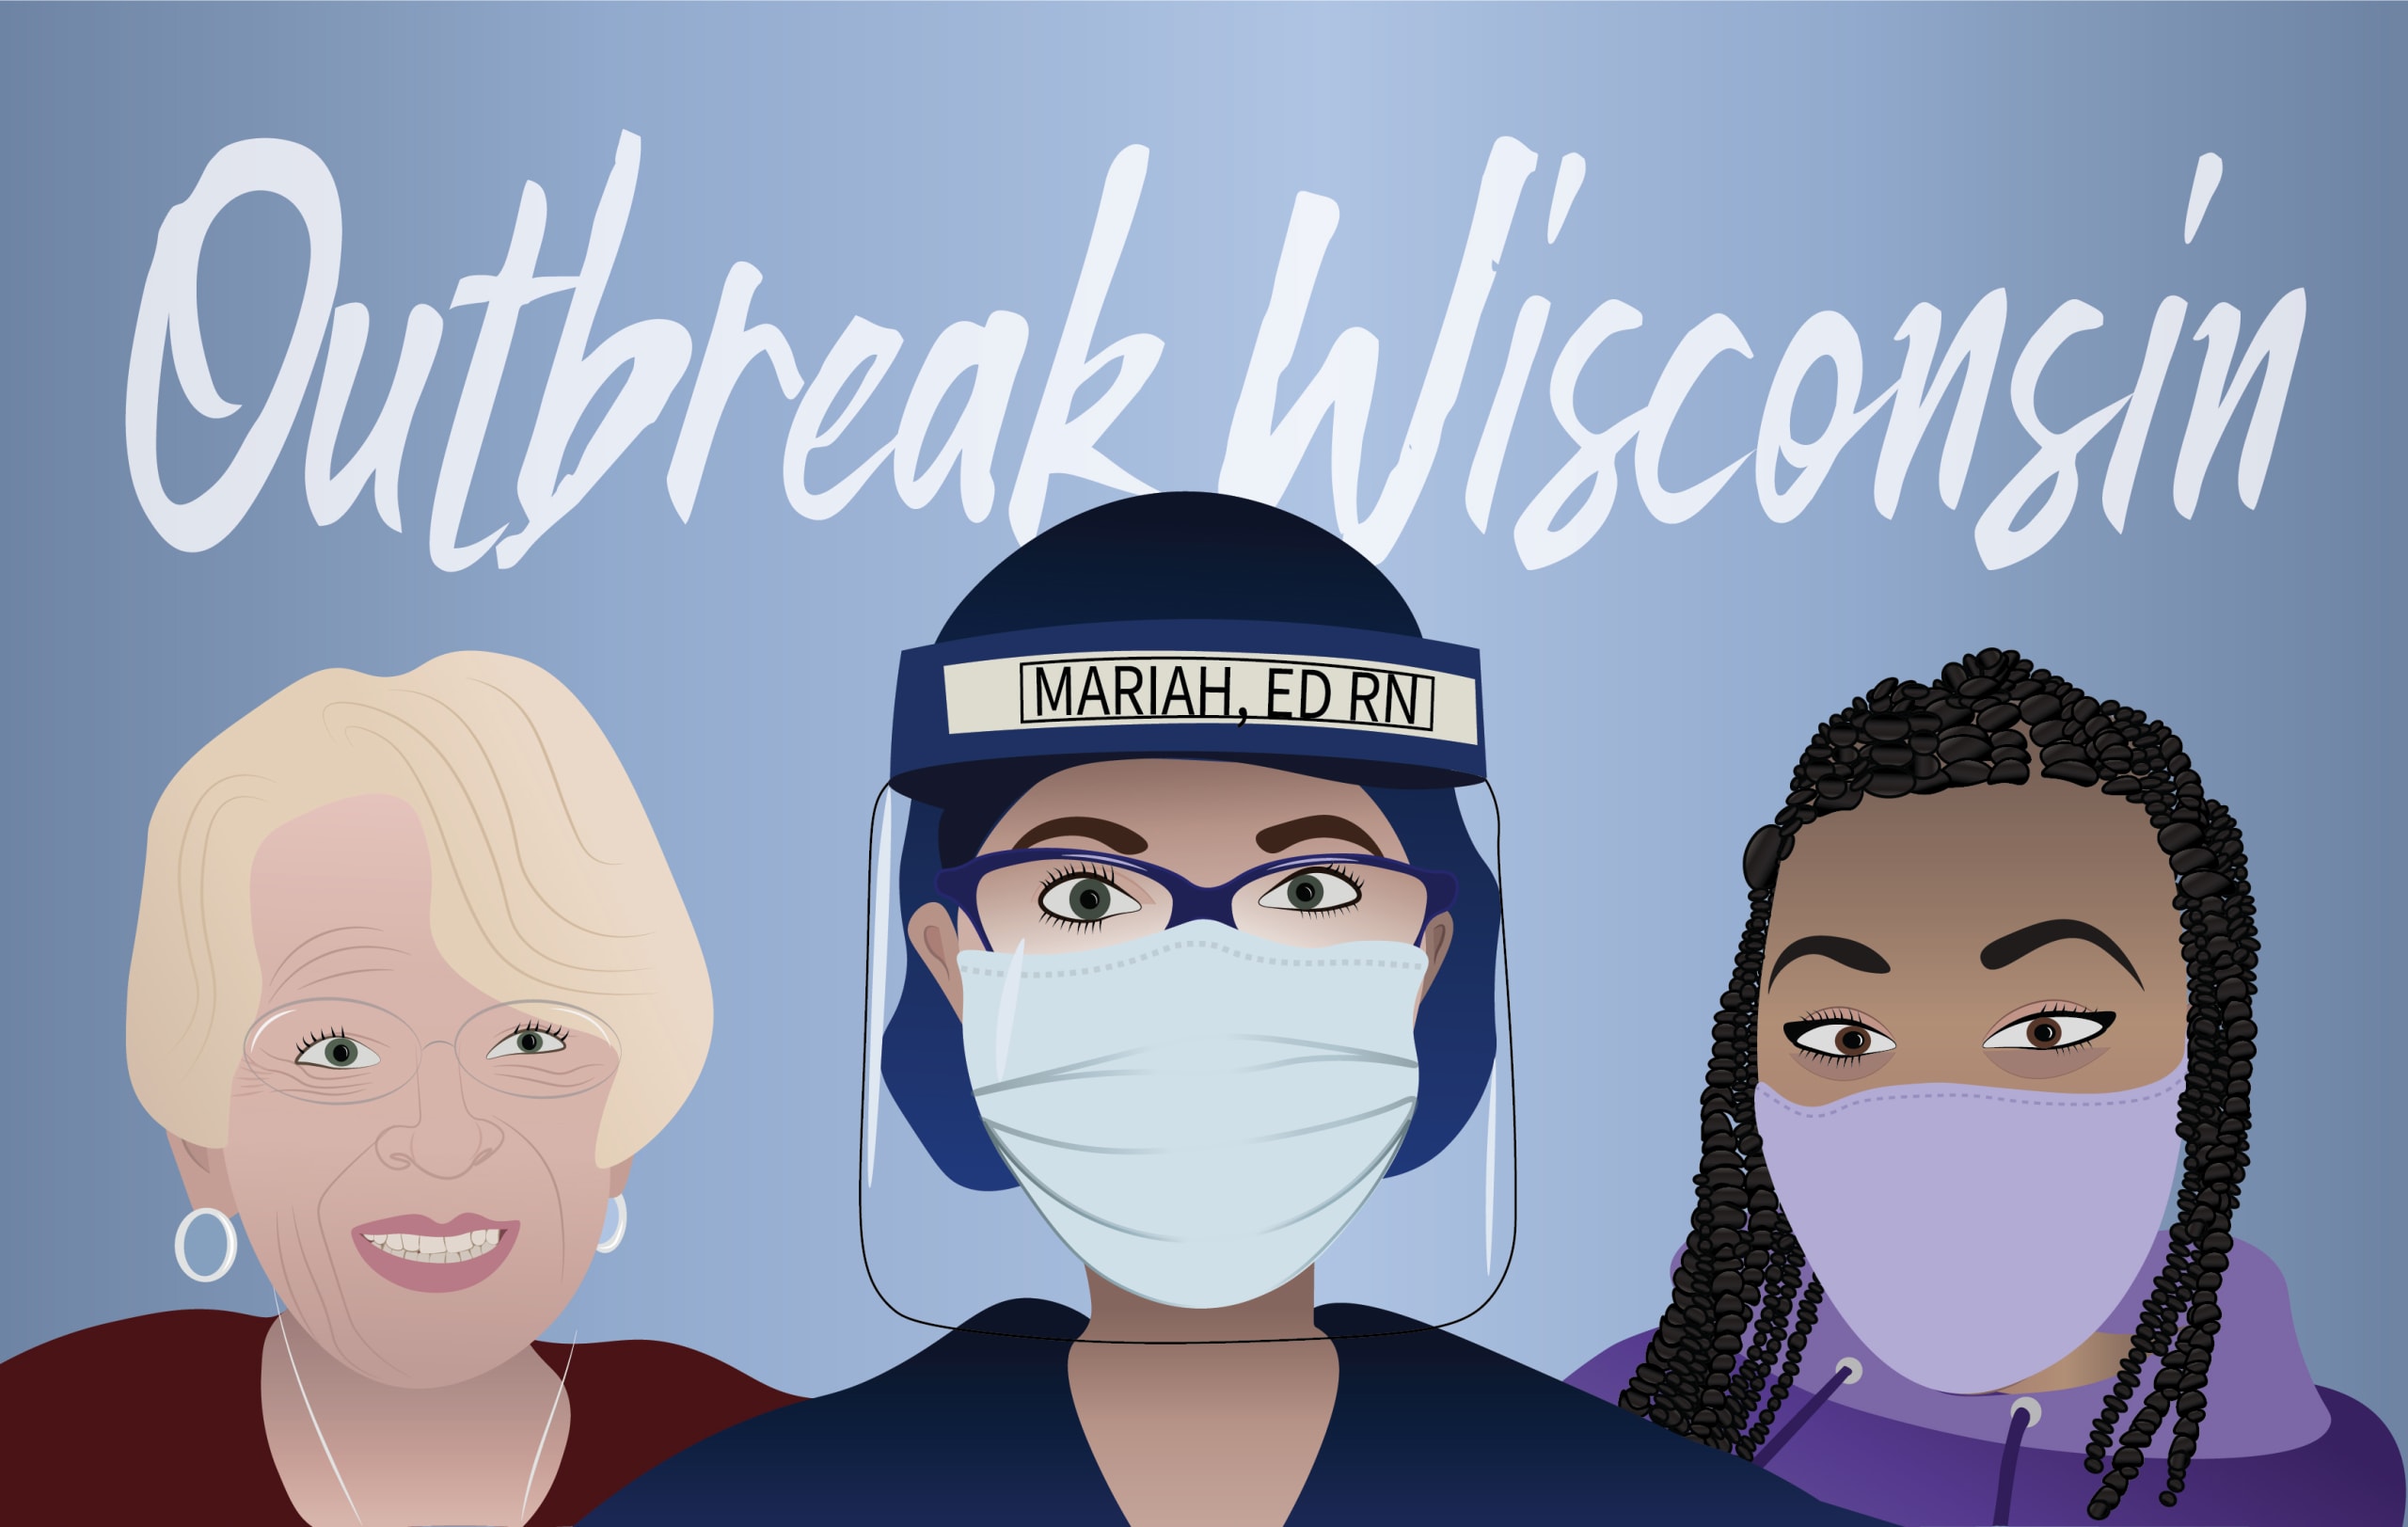 Outbreak Wisconsin: Wisconsinites Share How They Are Coping And Adapting 1 Year Into The Pandemic